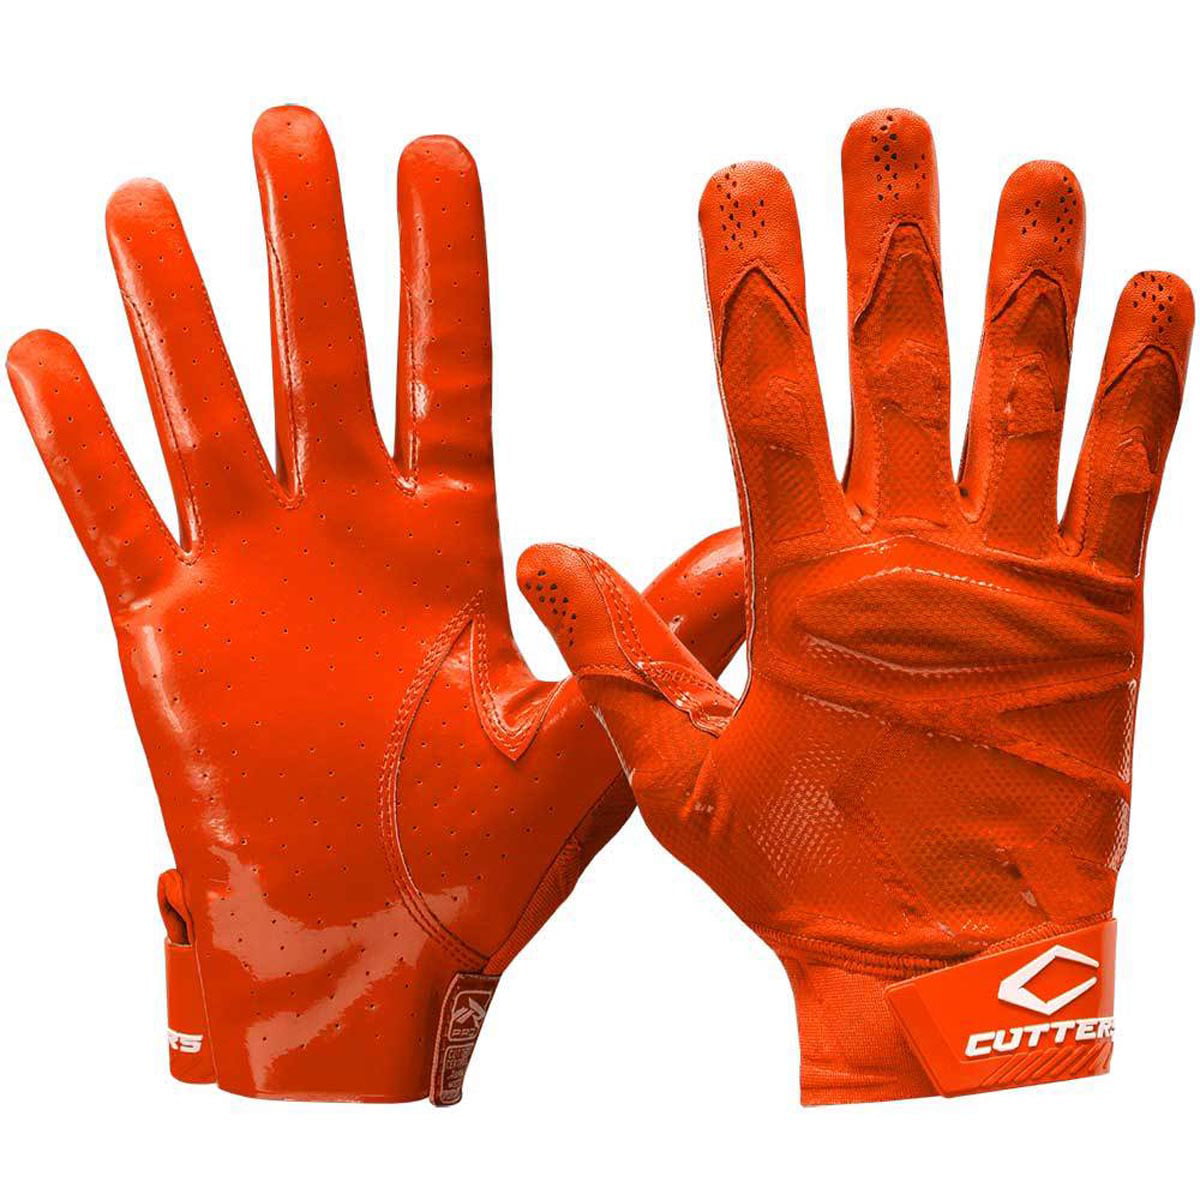 Cutters Adult Rev Pro 5.0 Football Receiver Gloves Small Red | Dick's Sporting Goods